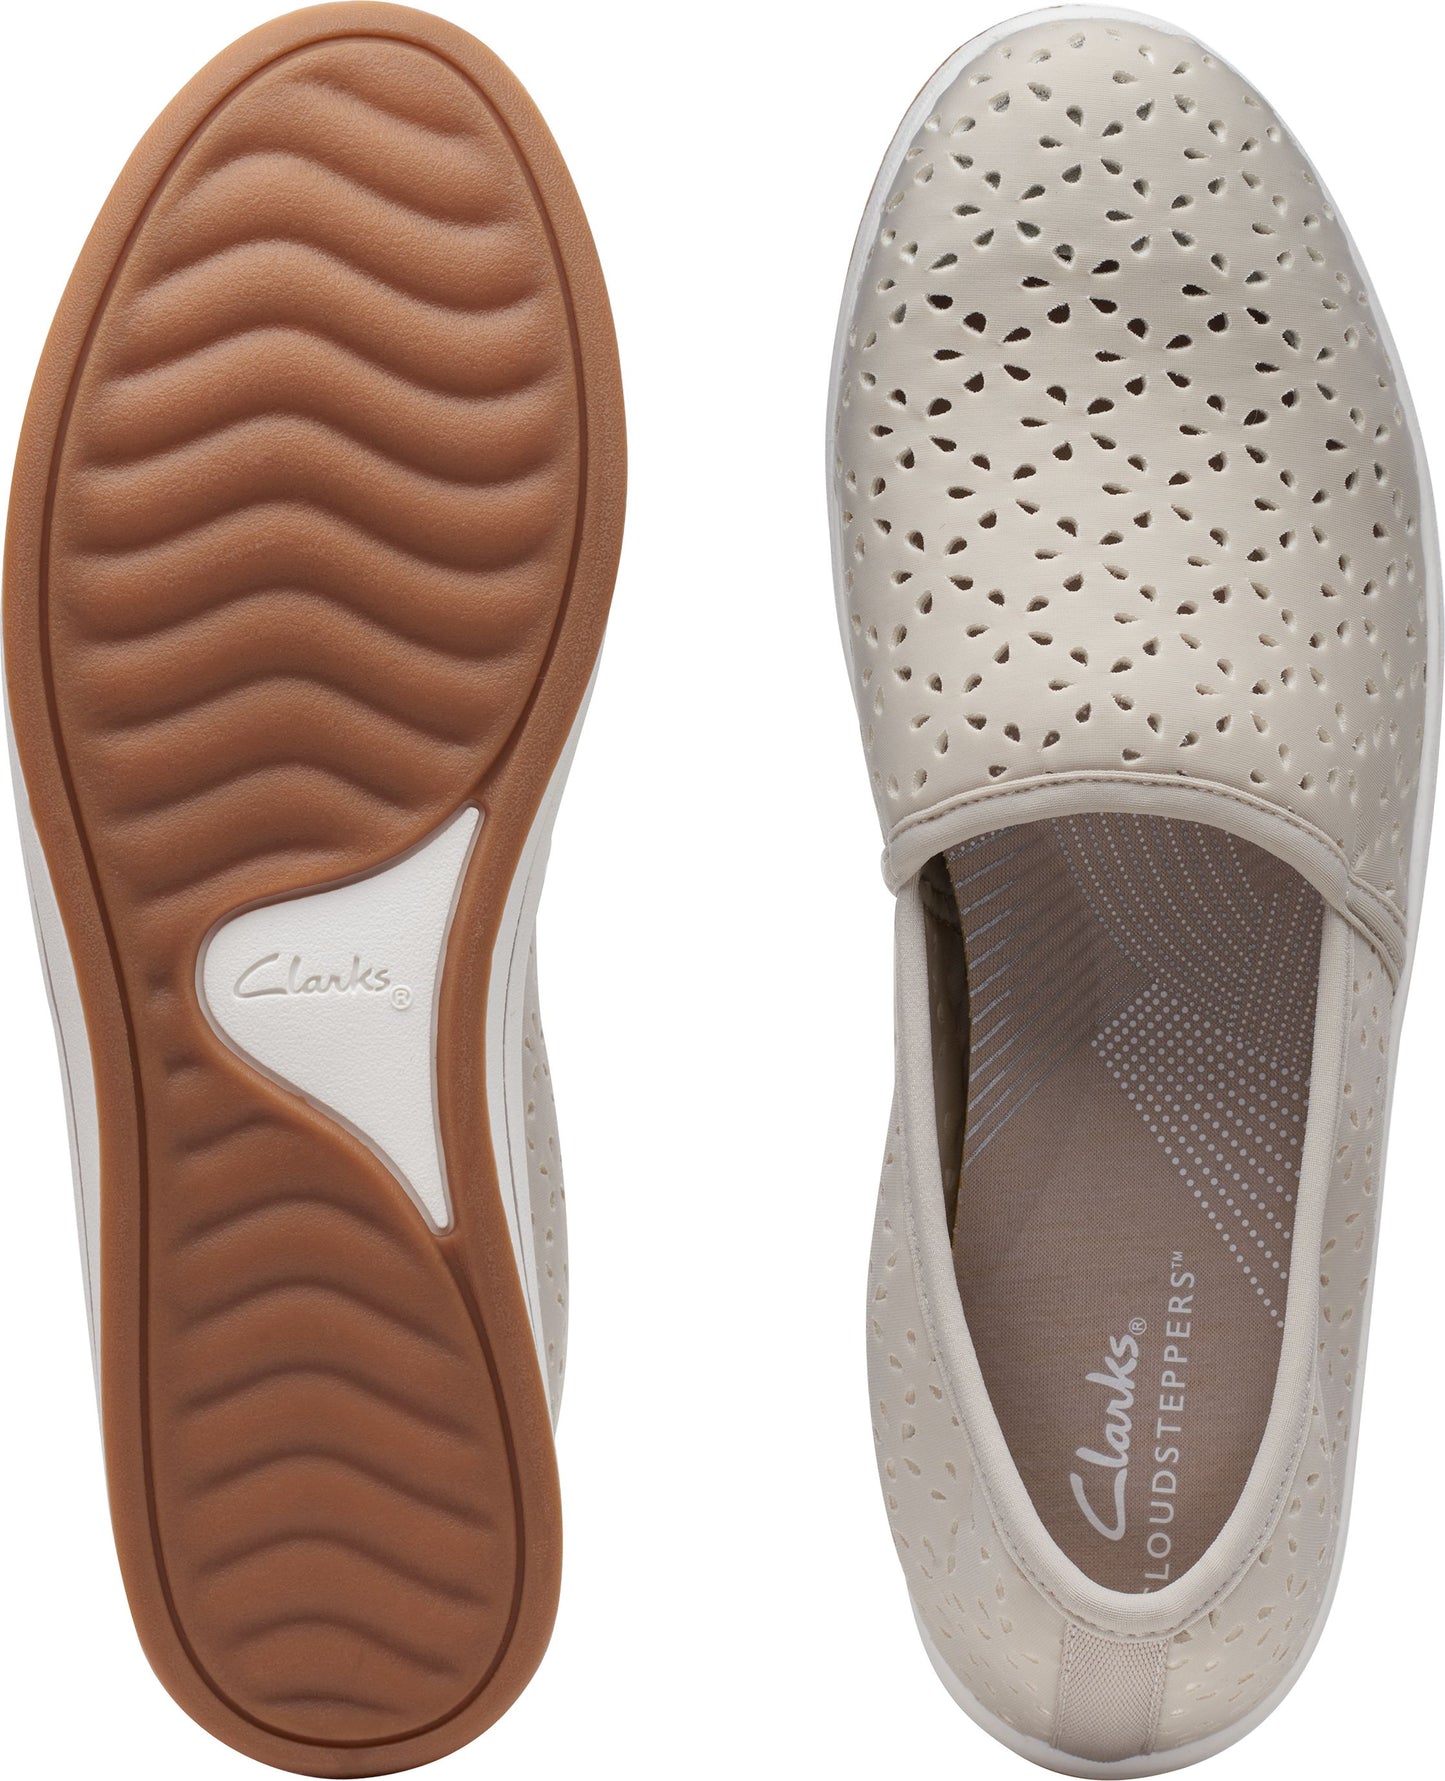 Clarks Shoes Breeze Emily Light Taupe